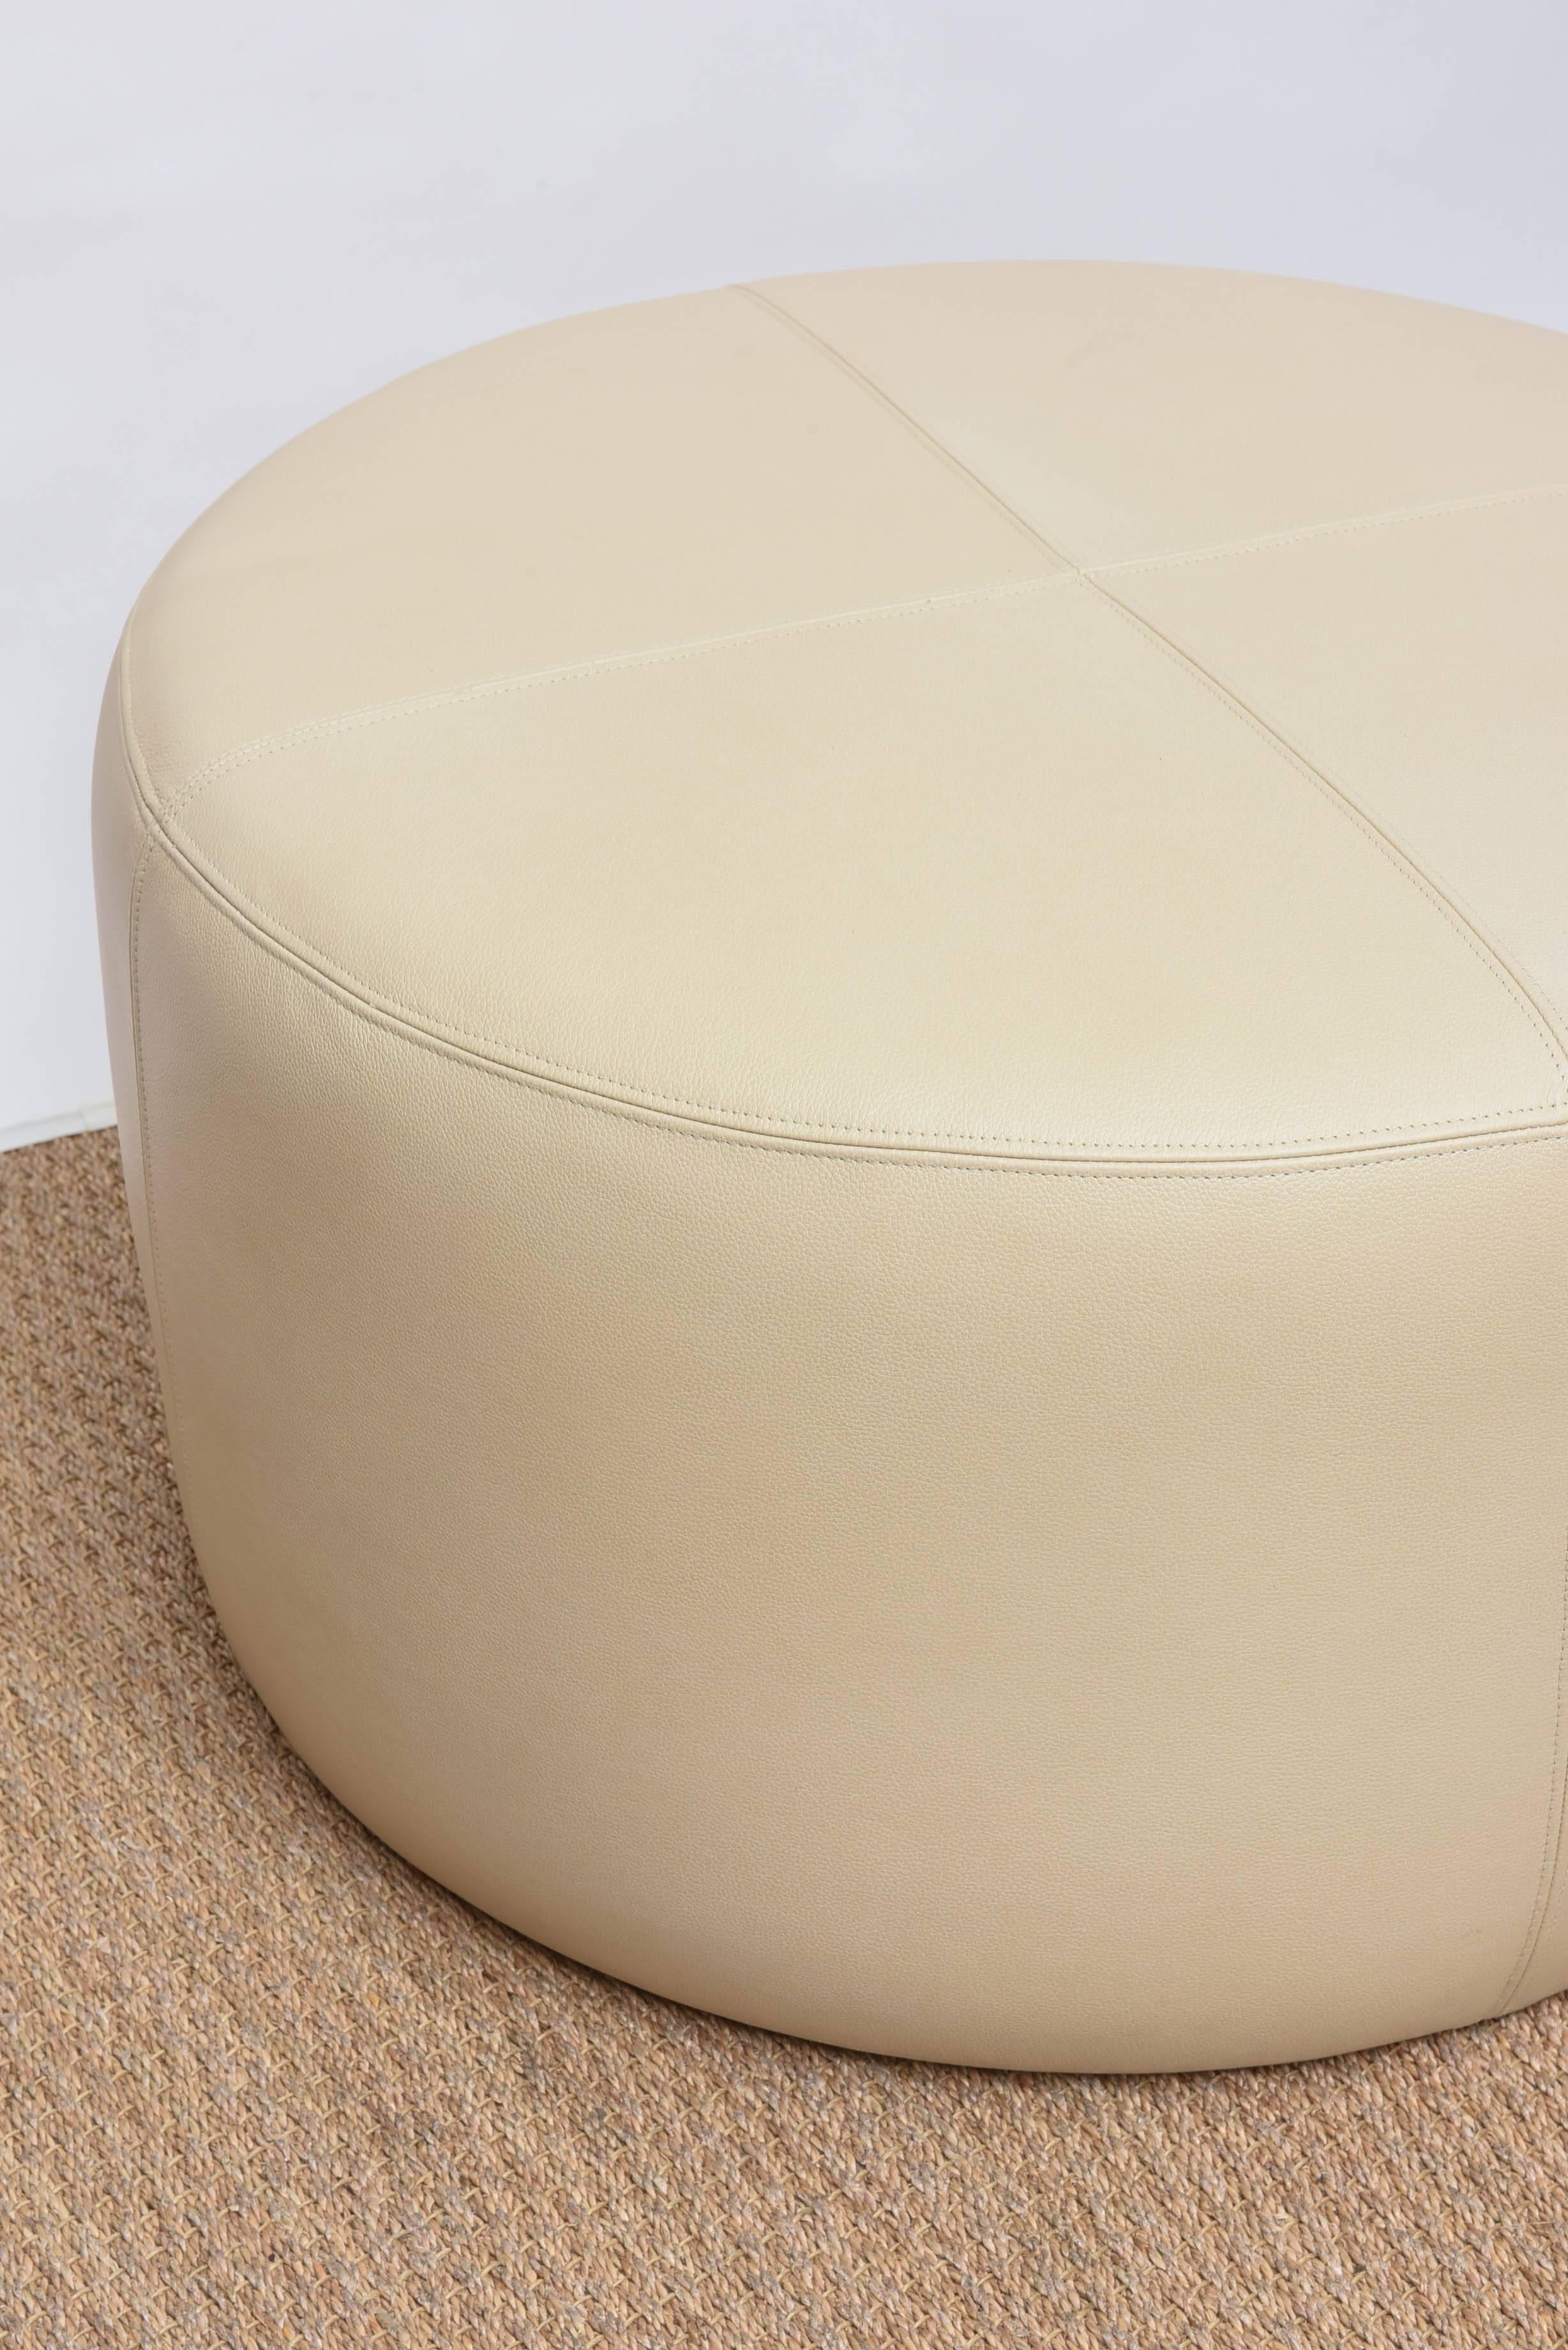 Embossed Modern Round Leather Ottoman, Pouf